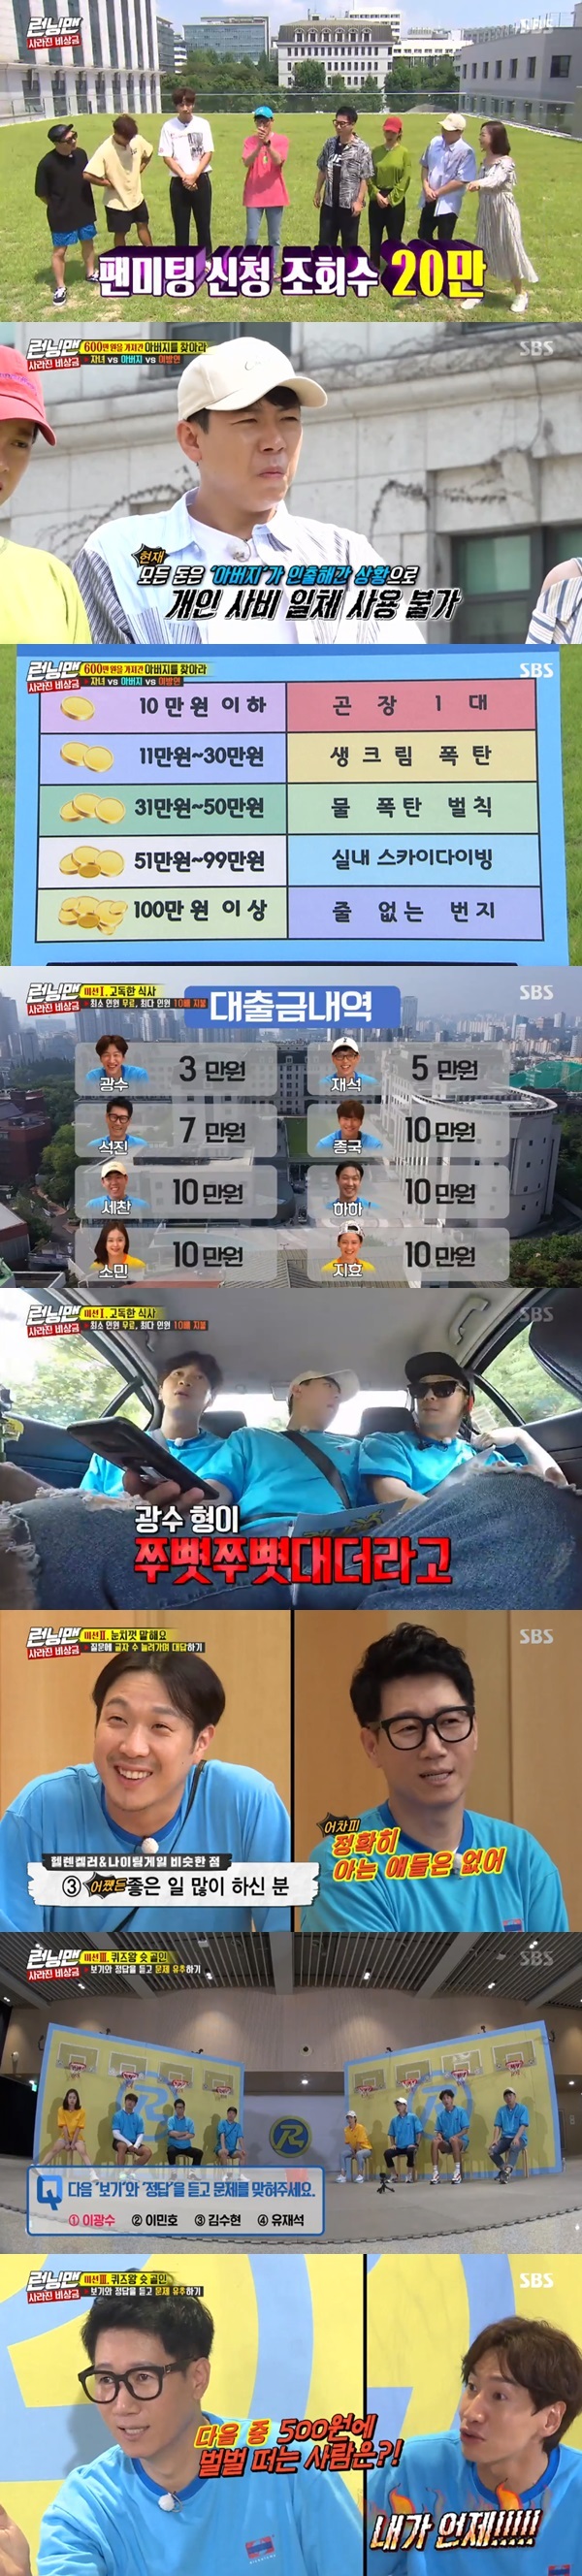 Seoul = = Ji Suk-jin won the final at Running Man Emergency cash race.On SBS Running Man broadcasted on the afternoon of the 18th, Race was held to find the missing Emergency cash.On this day, a race was held to find 6 million won for family emergency cash.The father of 6 Brother and Sister, who owned a total of 6 million won of Emergency cash, withdrew all the money from his children.If the father who lost his memory found out his identity, he could have a 6 million won monopolization at the same time as the race ended.It was a game that 6 Brother and Sister found the father who did not know his identity and divided the victory and the prize money when In-N-Out Burger was found.There was a stranger in the game. Each stranger could earn one million won for each In-N-Out Burger.If there was Brother and Sister who made the stranger and father In-N-Out Burger, it was possible to monopolize the prize money.For the race for the mission, the crew had to borrow; the member who failed to win the prize had to repay the loan in a way that the crew had Jessie.The first mission of the members on loan was to solo eat. If you find a restaurant with a minimum number of people, you can eat for free, and the most restaurants have to pay ten times as much.Game results show Song Ji-hyo took first place, Choices hints about his father; he received content about his fathers identity and identity.The second mission was to answer the production teams questions with two letters, followed by a game that answered by increasing the number of letters.Jeon So-min, who won first place, Choices hints related to his father.The third mission was a game that succeeded when Jessie was told and answered the correct answer and inferred the problem.Unlike usual, the members suspected the Gentile in the successive wins of Jeon So-min; after receiving a hint from his father, Jeon So-min found out that his father was active as his real name.A full-scale race has begun with Jeon So-min suspected of being a potential stranger.Starting with her child Haha, she was in-N-Out Burger to Song Ji-hyo.Kim Jong Kook was a stranger and suspected of Jeon So-min, making In-N-Out Burger, and both were eliminated.Then Yang Se-chan, who was eliminated by Lee Kwang-soo, was a stranger.Lee Kwang-soo went on to make In-N-Out Burger suspect of Yoo Jae-Suk as his father.All children became In-N-Out Burger and eventually father Ji Suk-jin won the championship, which earned Ji Suk-jin a prize of 6 million won.The final prize money was not to be penalized instead of Donation under the Ji Suk-jin name.Meanwhile, Running Man is a program that solves the missions of the best South Korean entertainers everywhere, and reveals the hidden back of the South Korean landmarks through constant racing and tense confrontation.It airs every Sunday at 4:50 p.m.